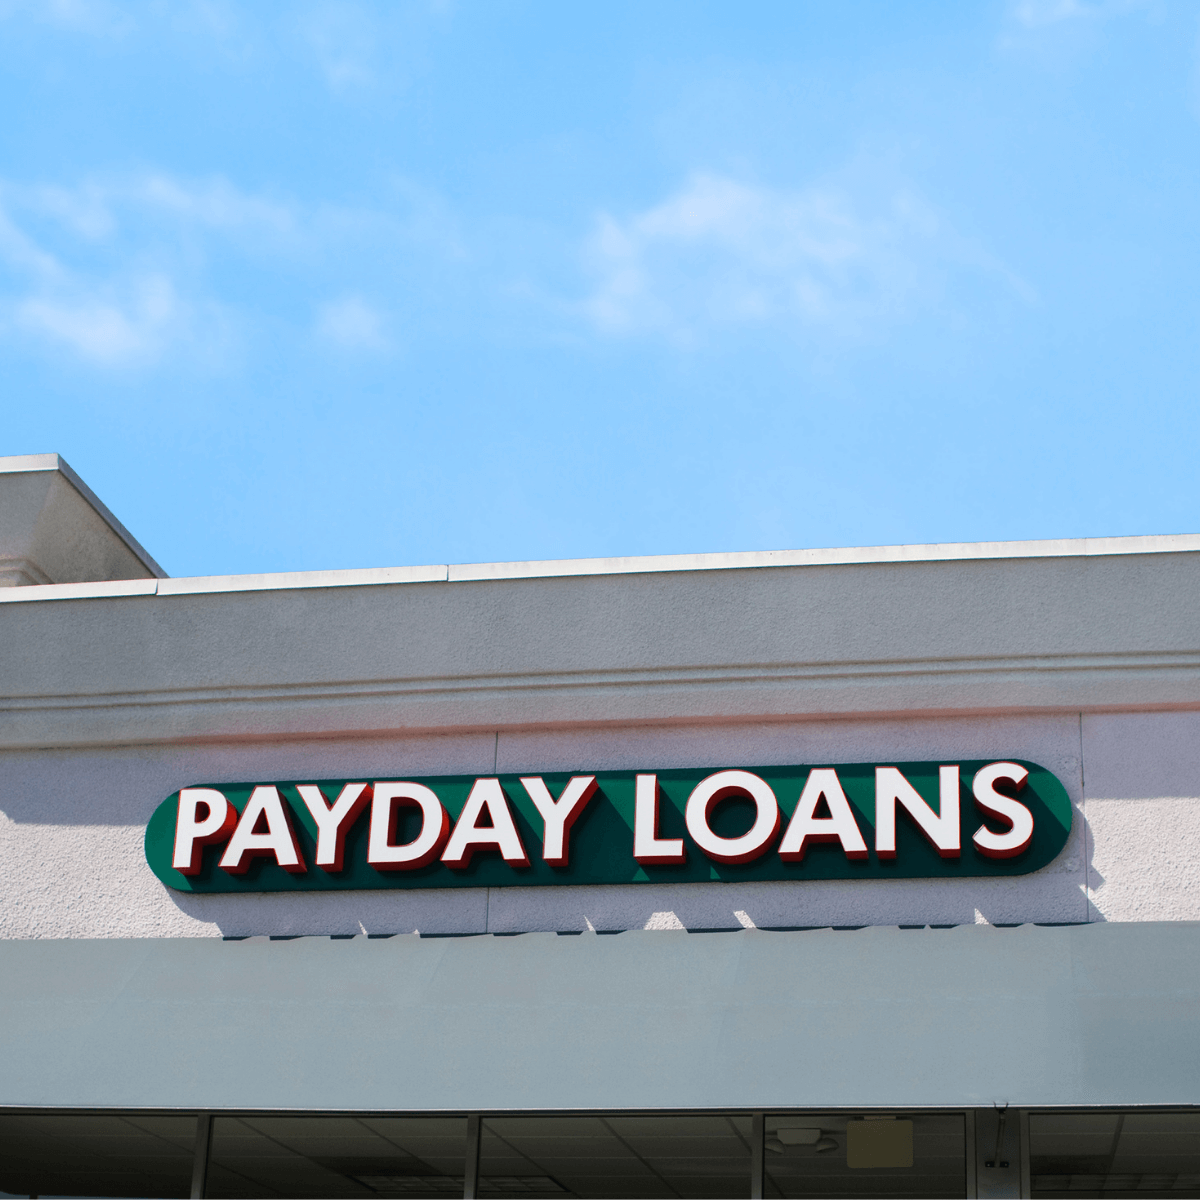 50 Questions Answered About payday loan debt relief